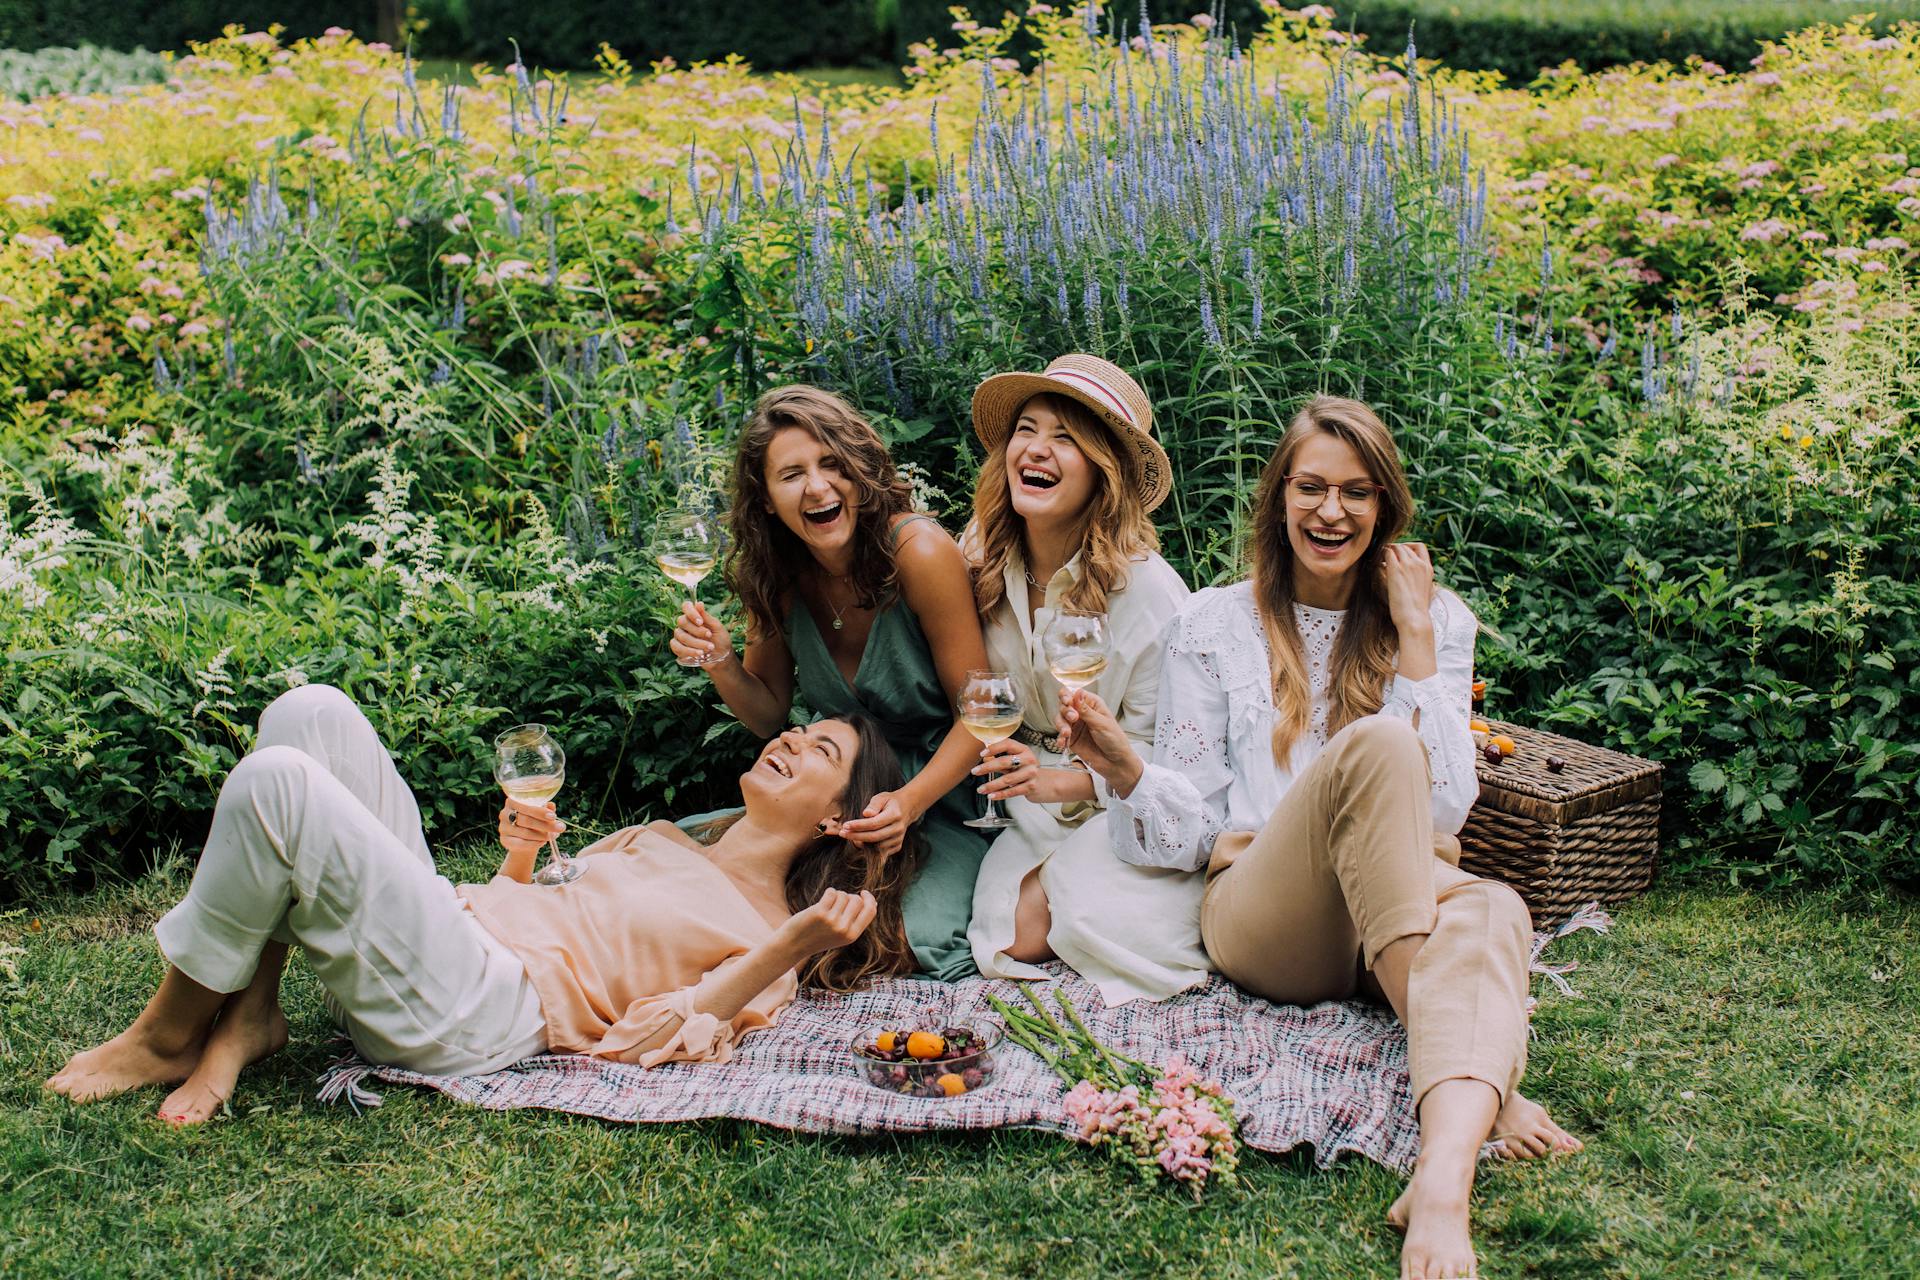 Women sitting on the grass and enjoying their drinks | Source: Pexels